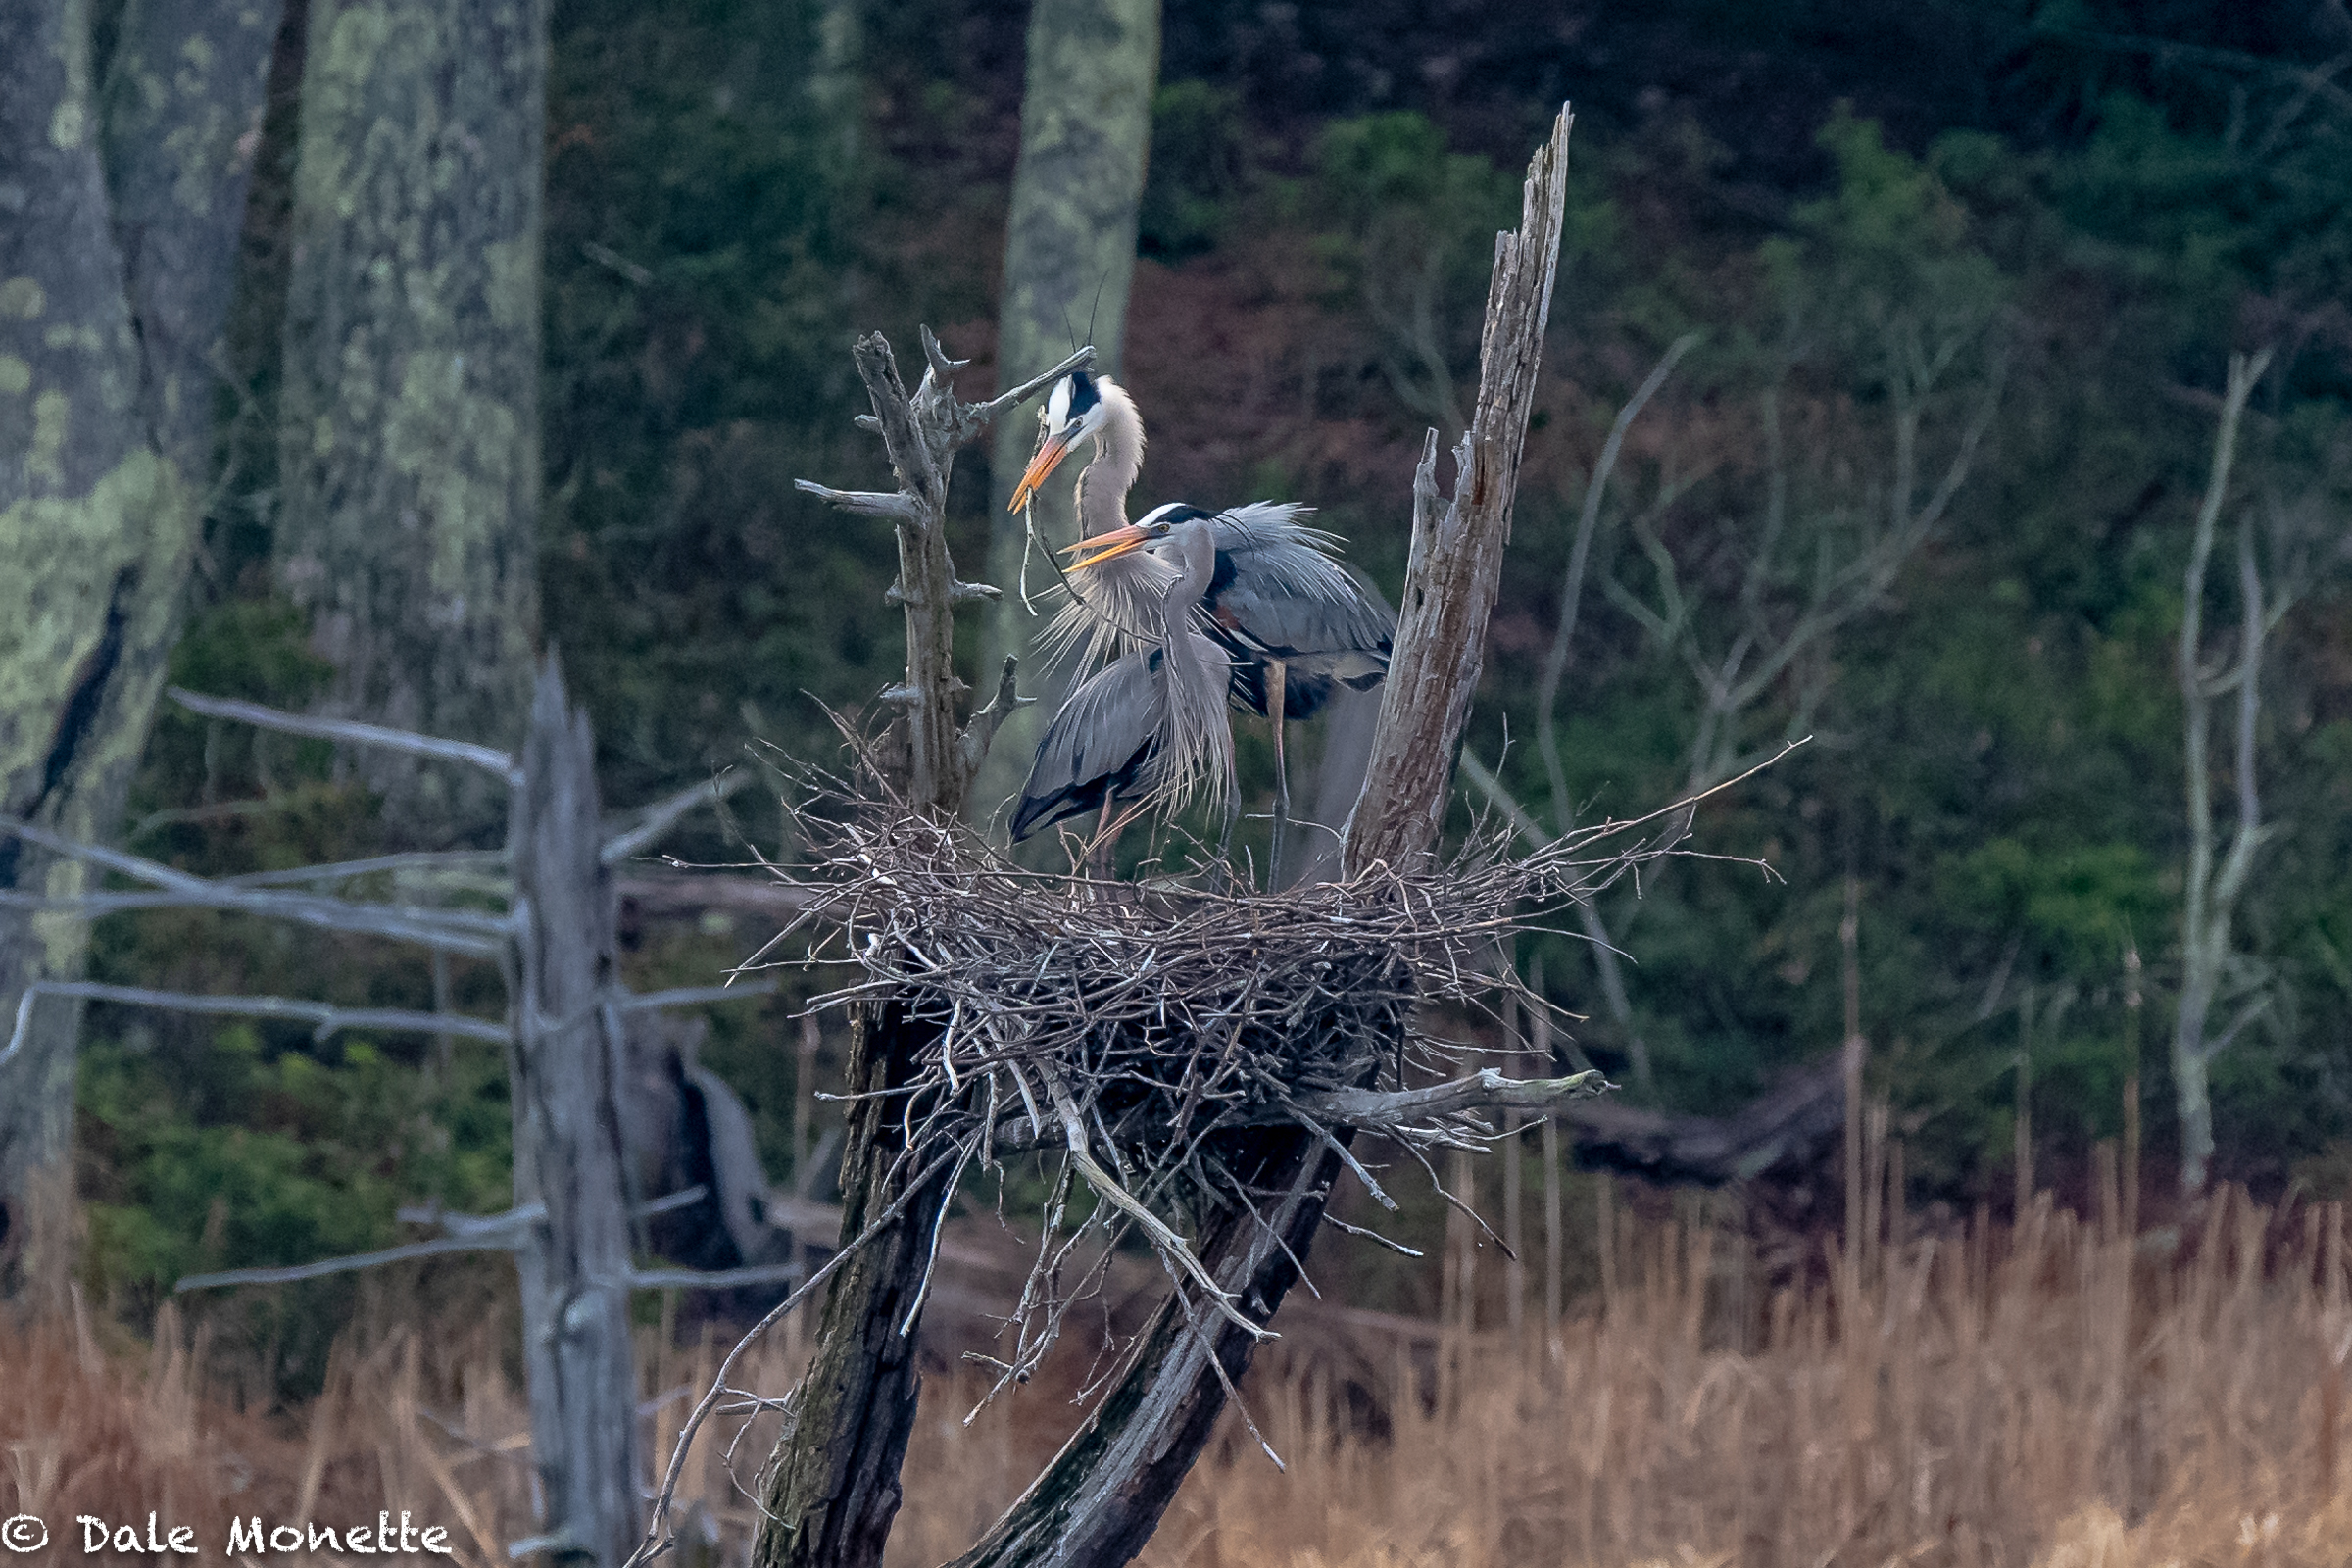   This mated pair of great blue herons spent most of the morning repairing their nest from winters damage. They mate for life and will also use the same nest year after year or until it blows down.   